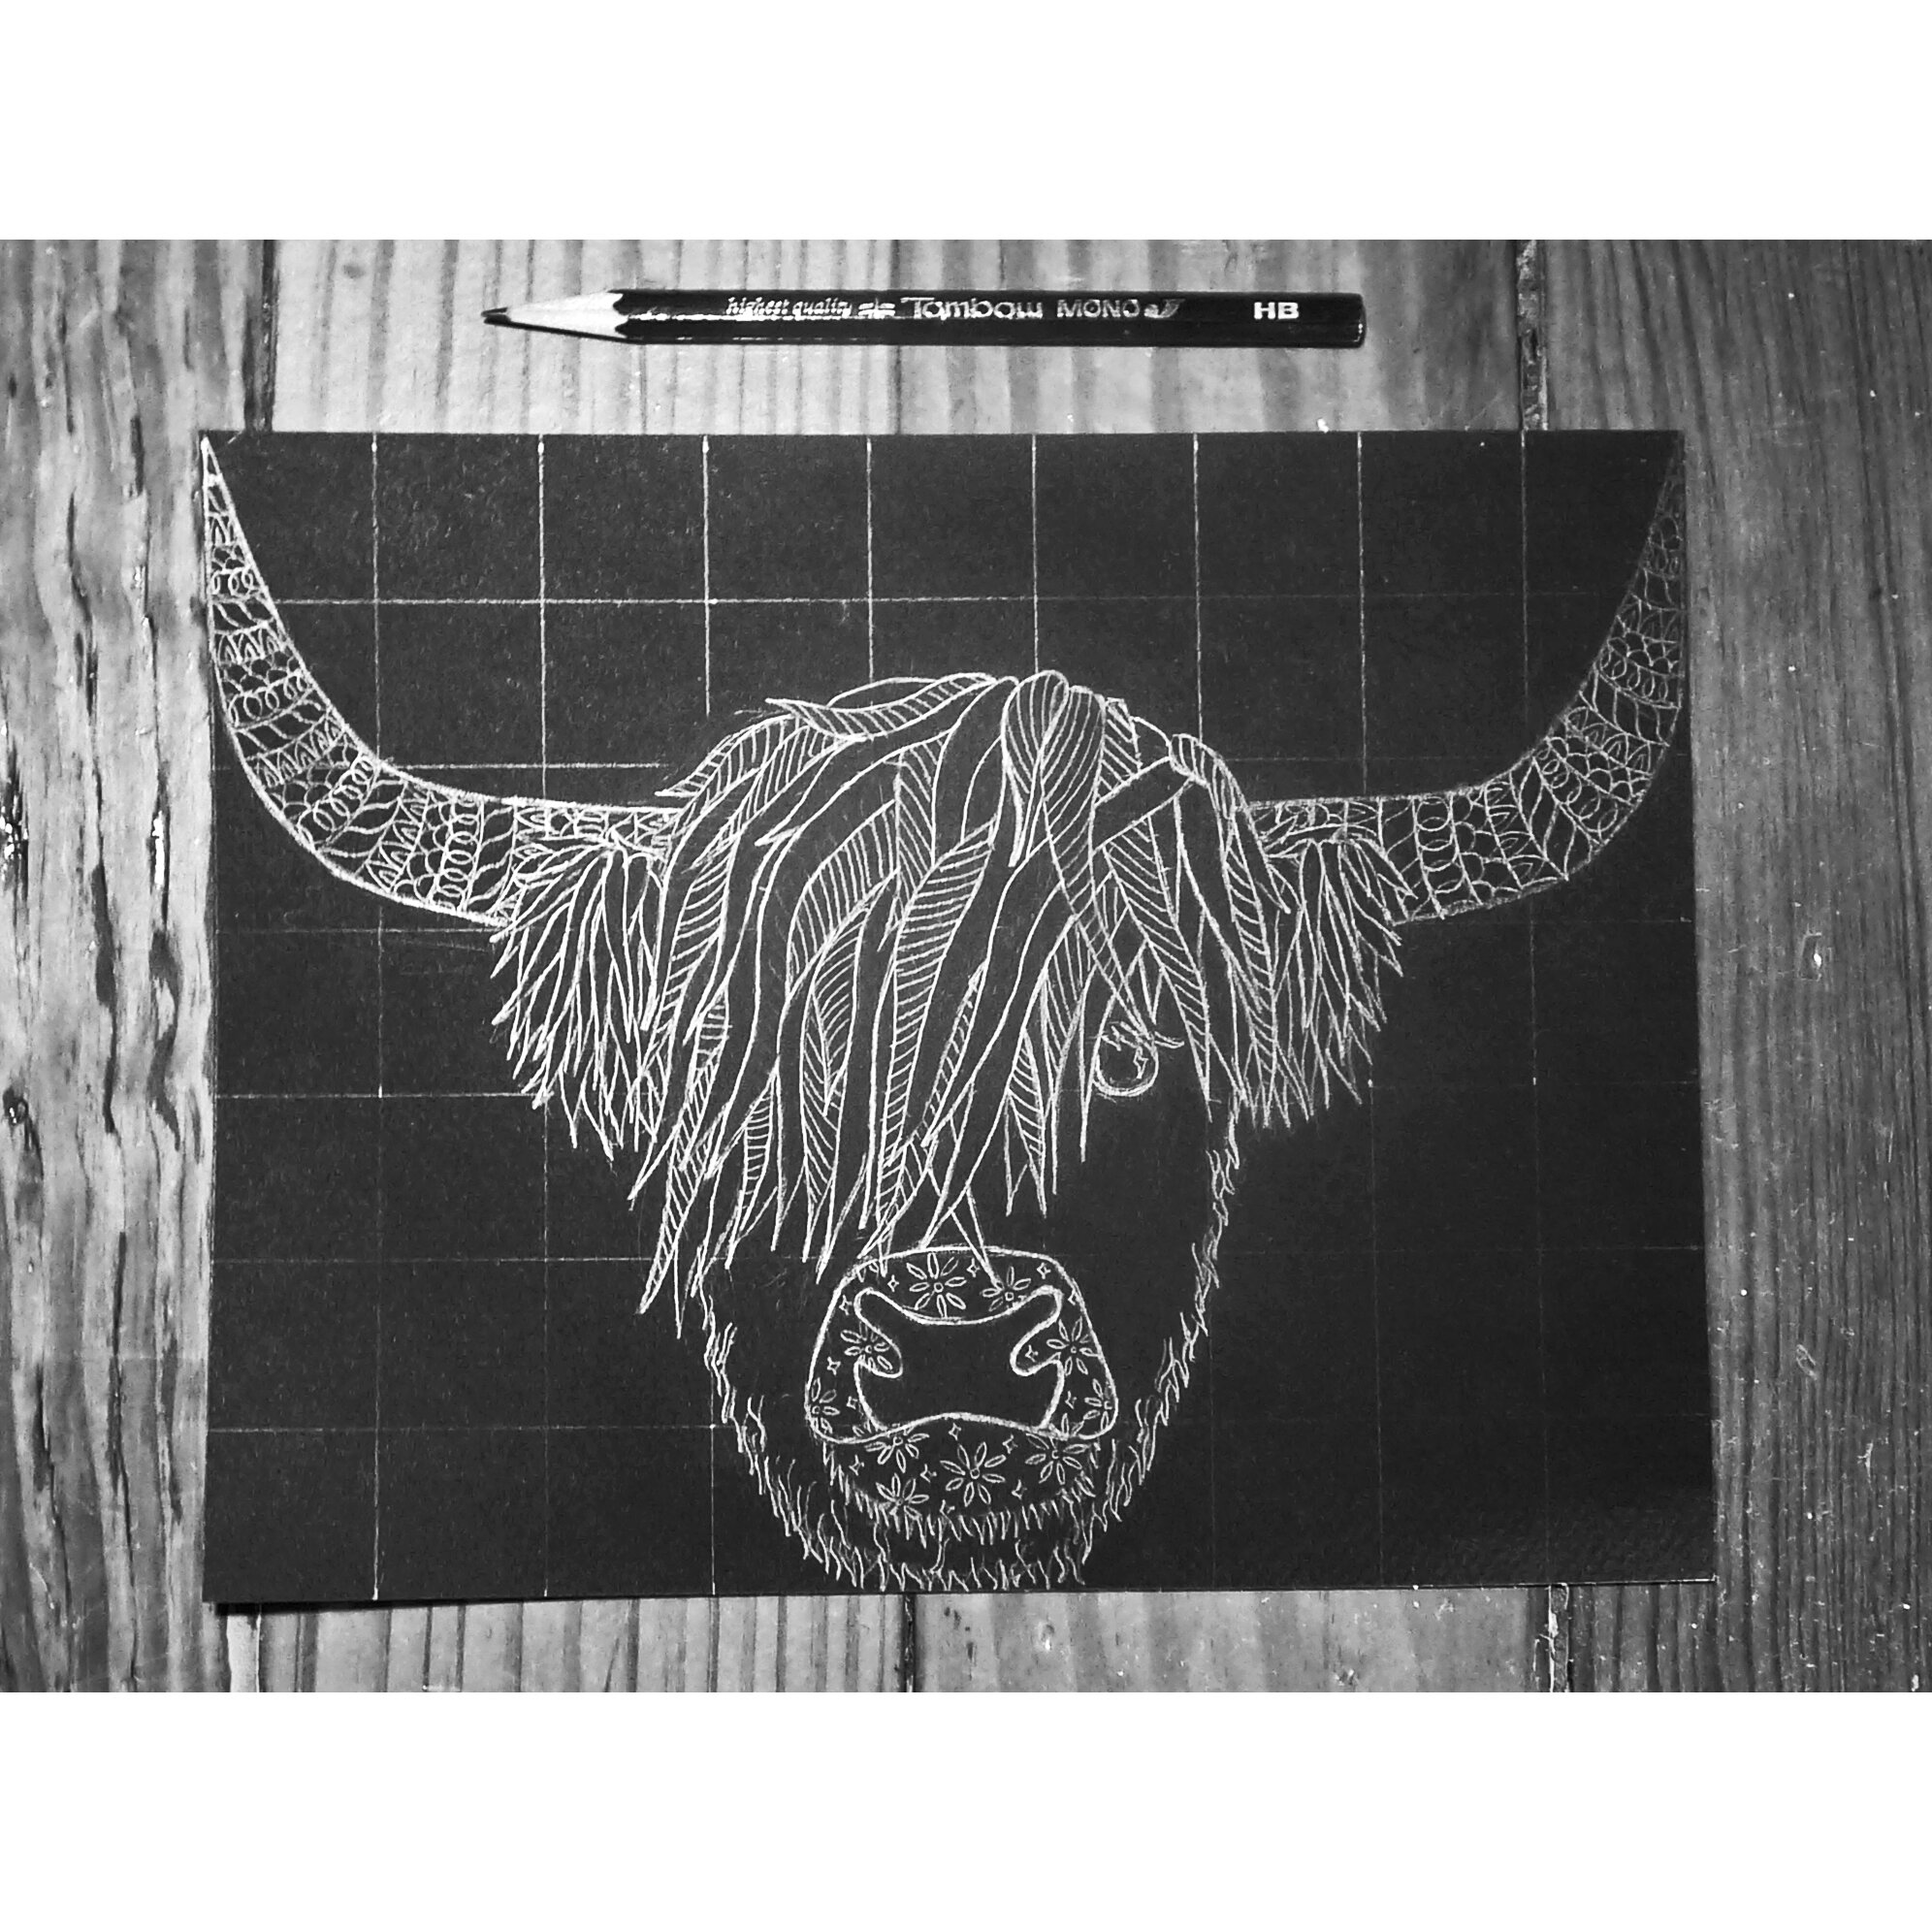 Highland cow paper (2637845)